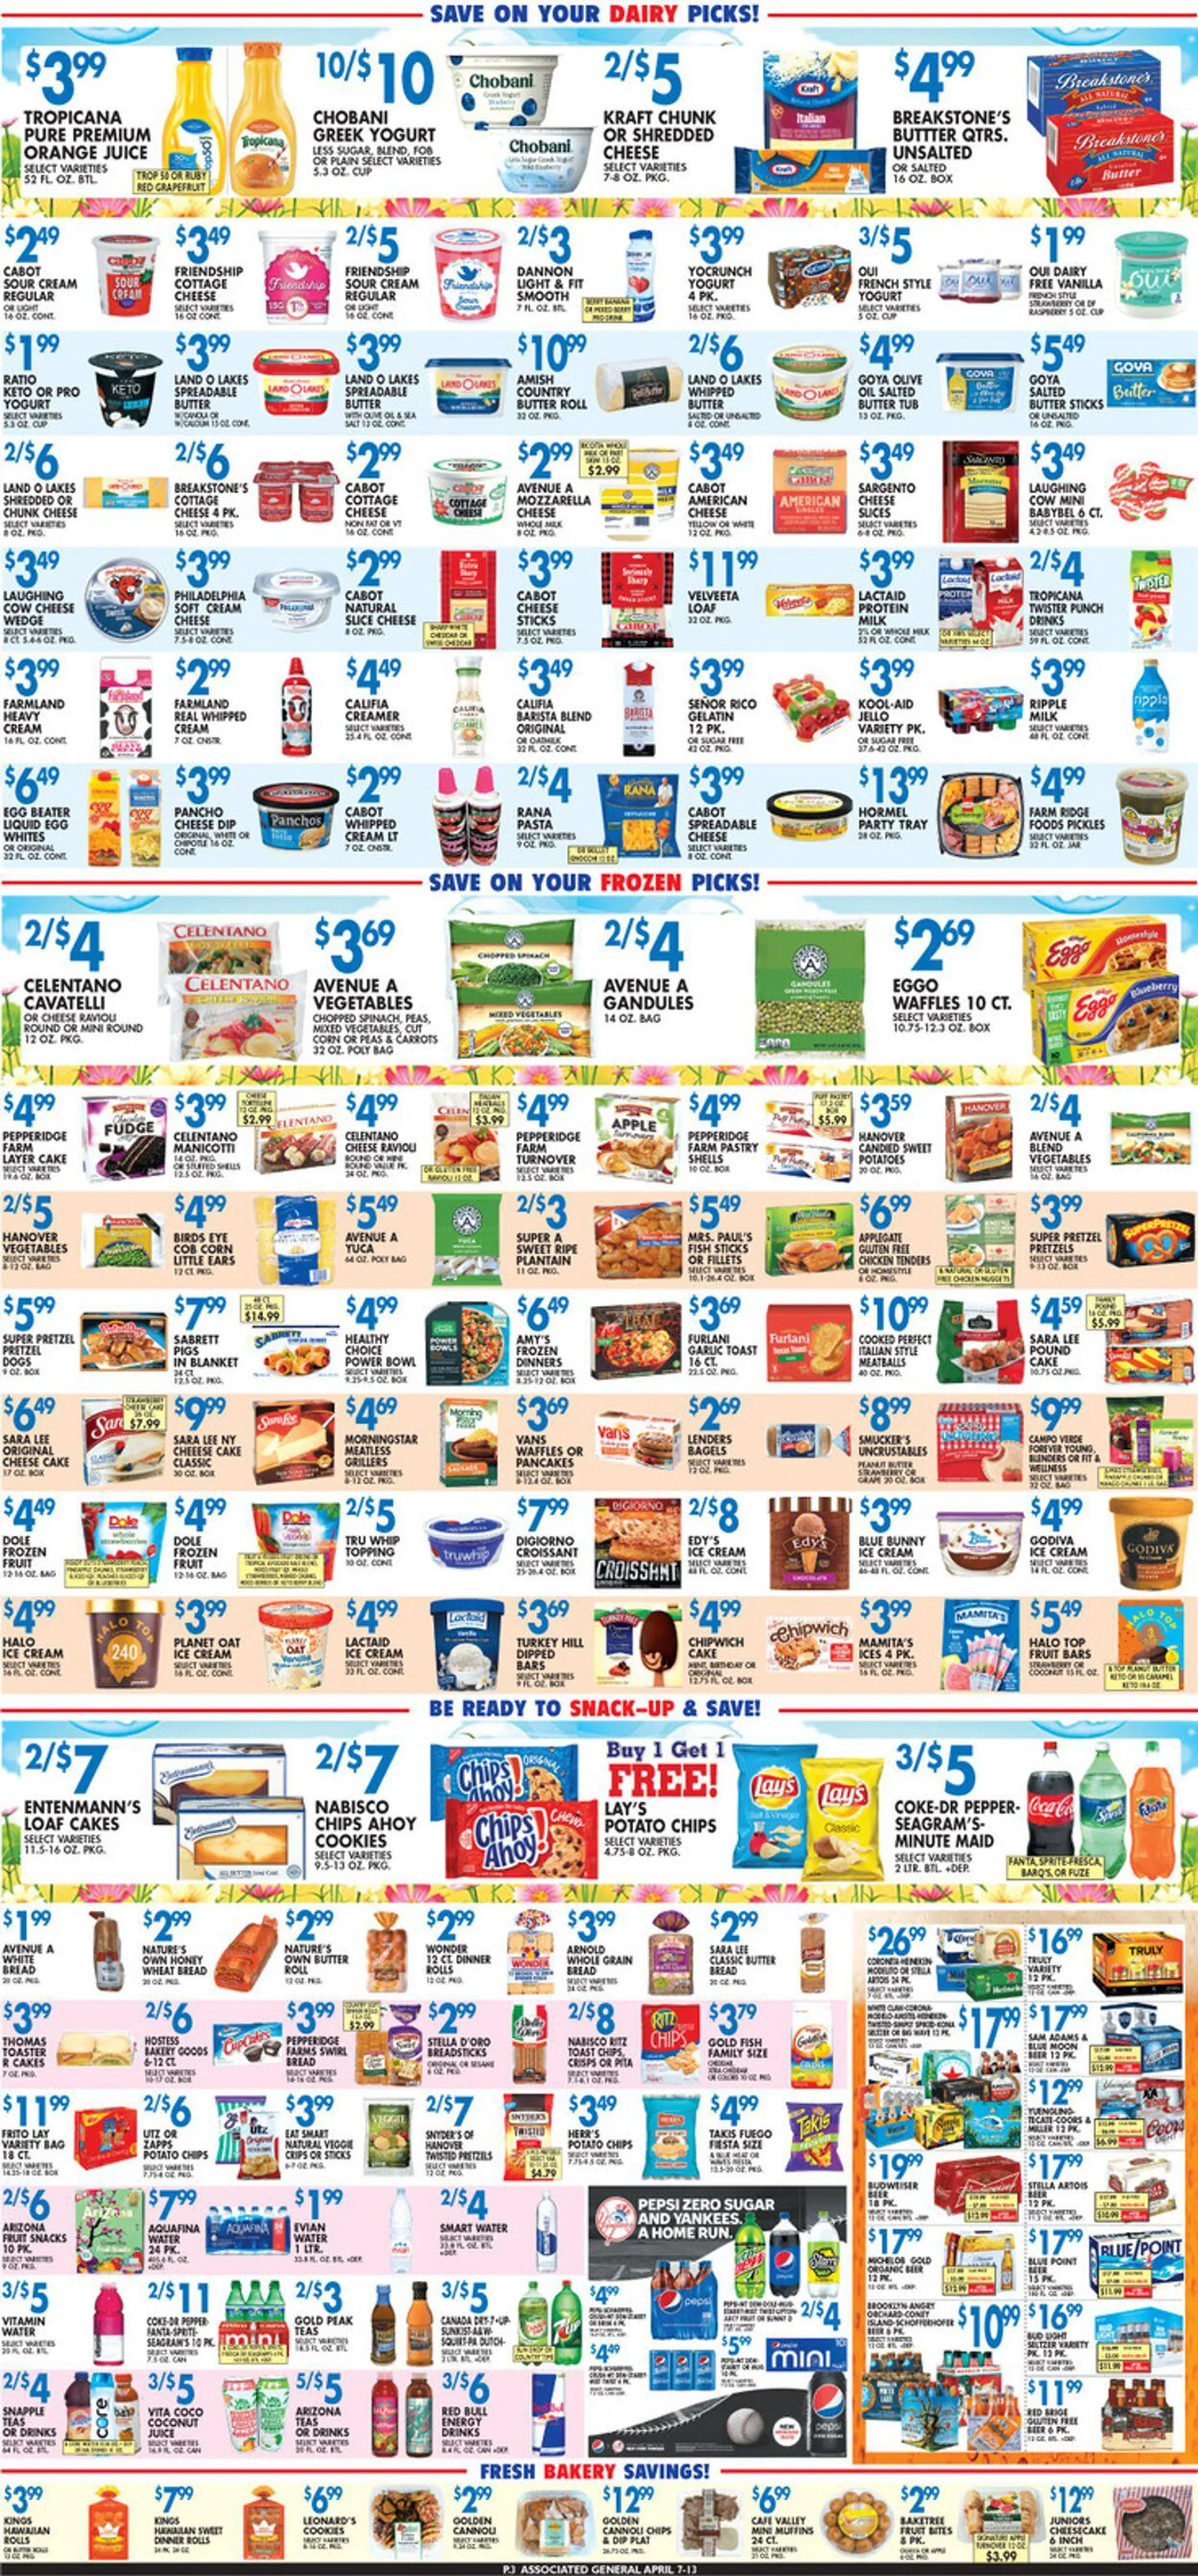 Associated Supermarkets Current weekly ad - 3